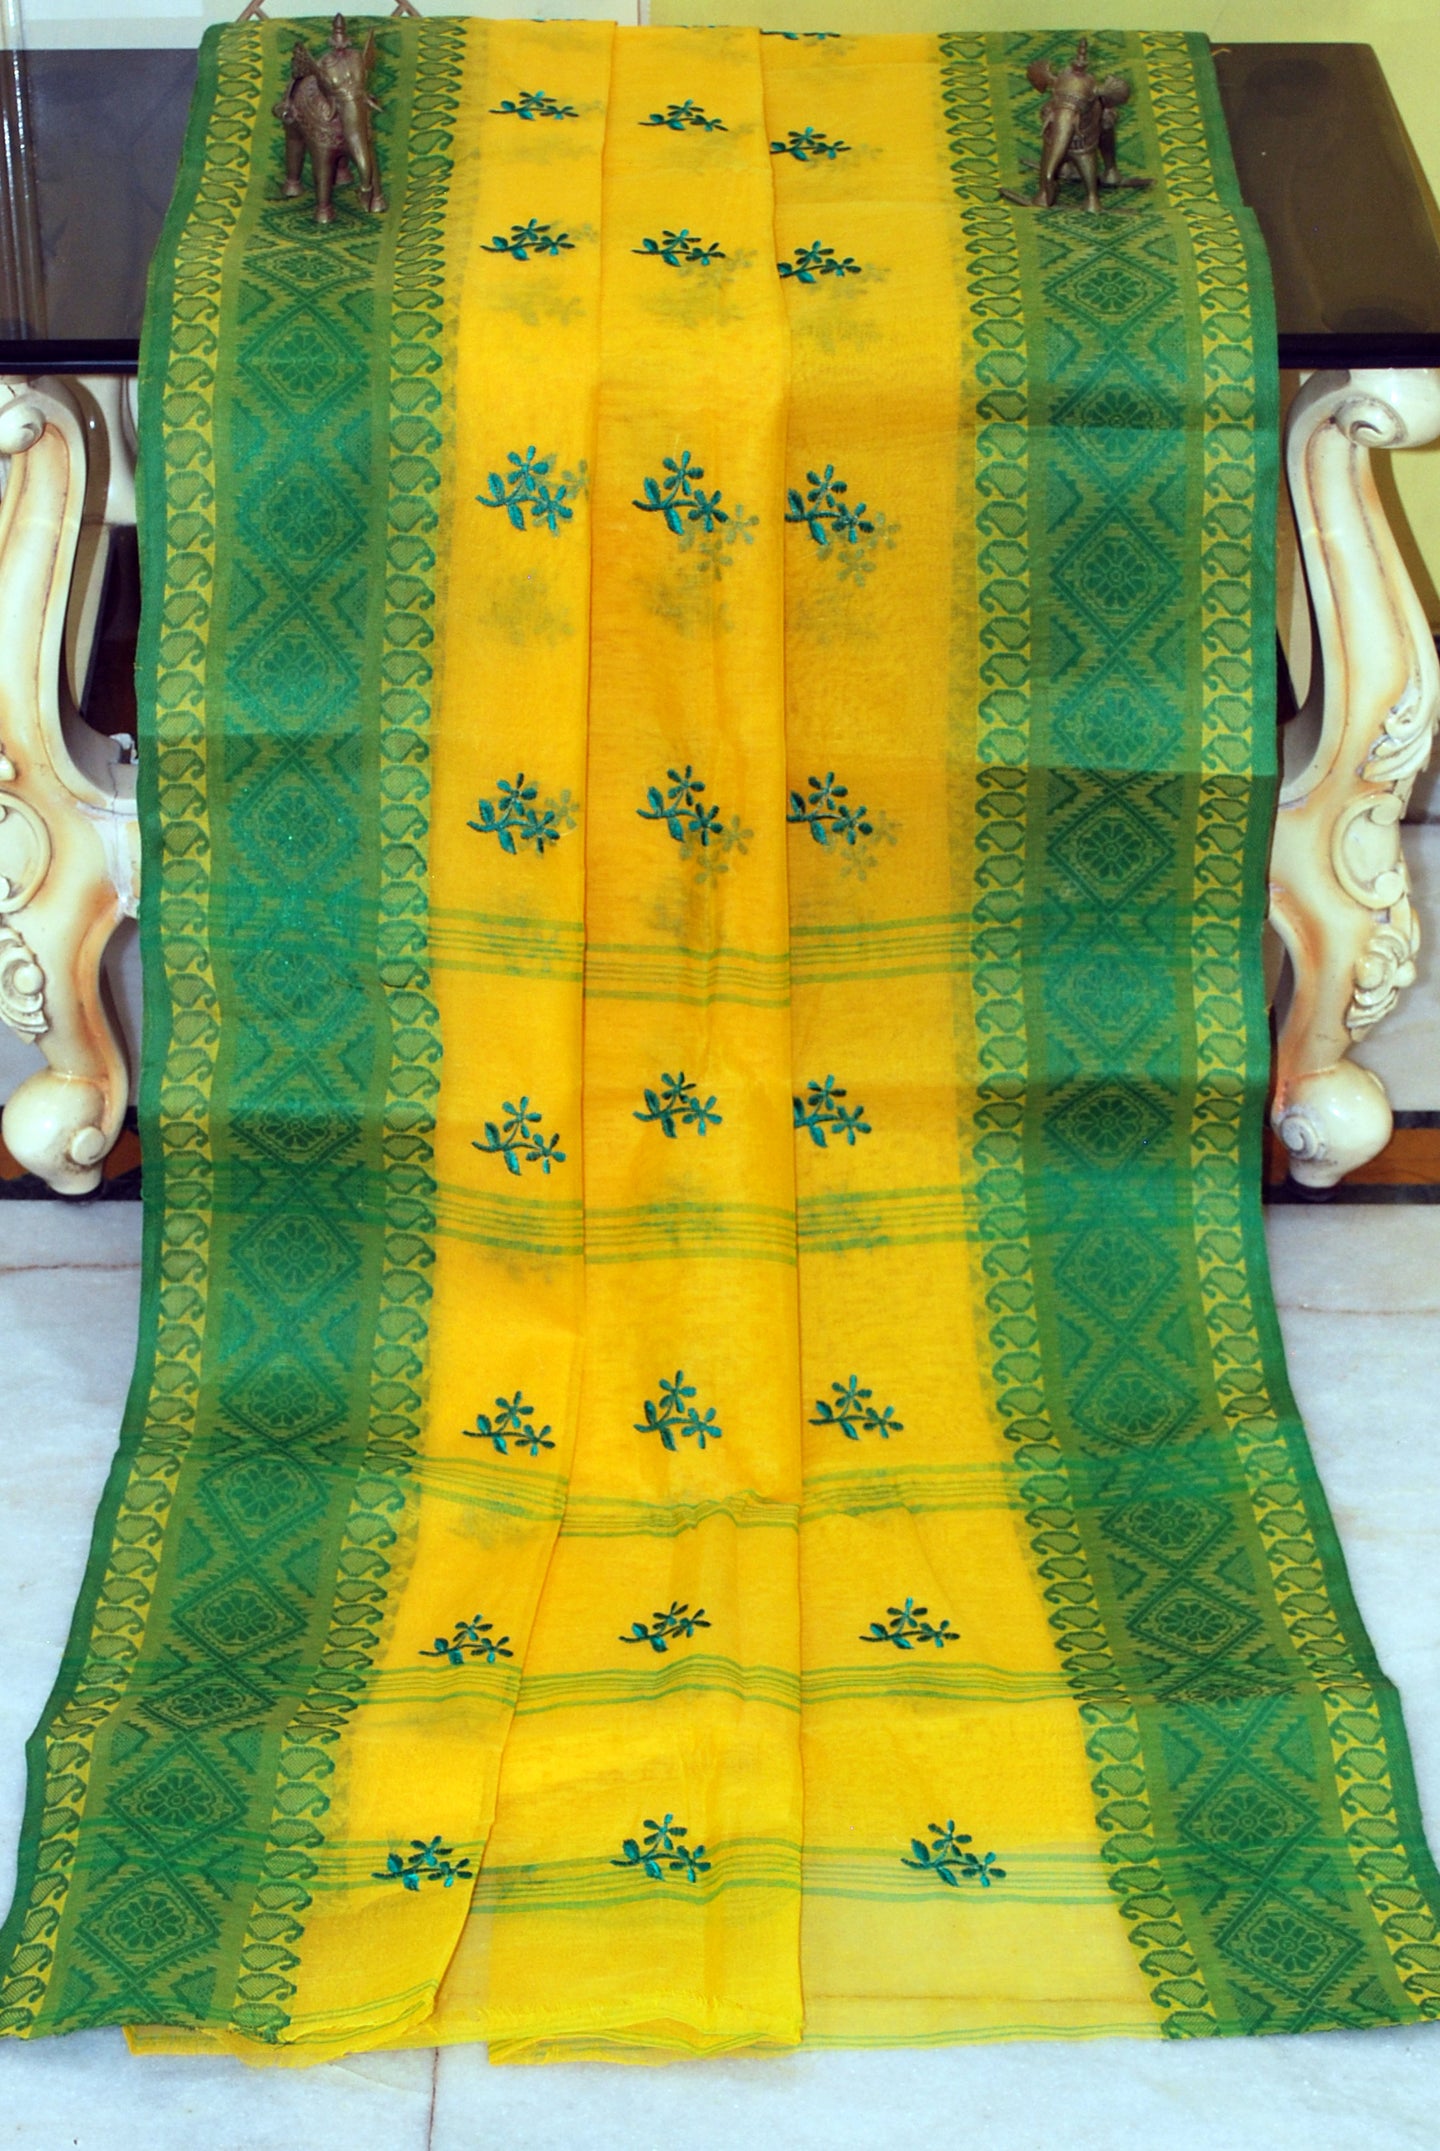 Bengal Handloom Cotton Saree with Floral Motif Embroidery Work in Yellow and Green